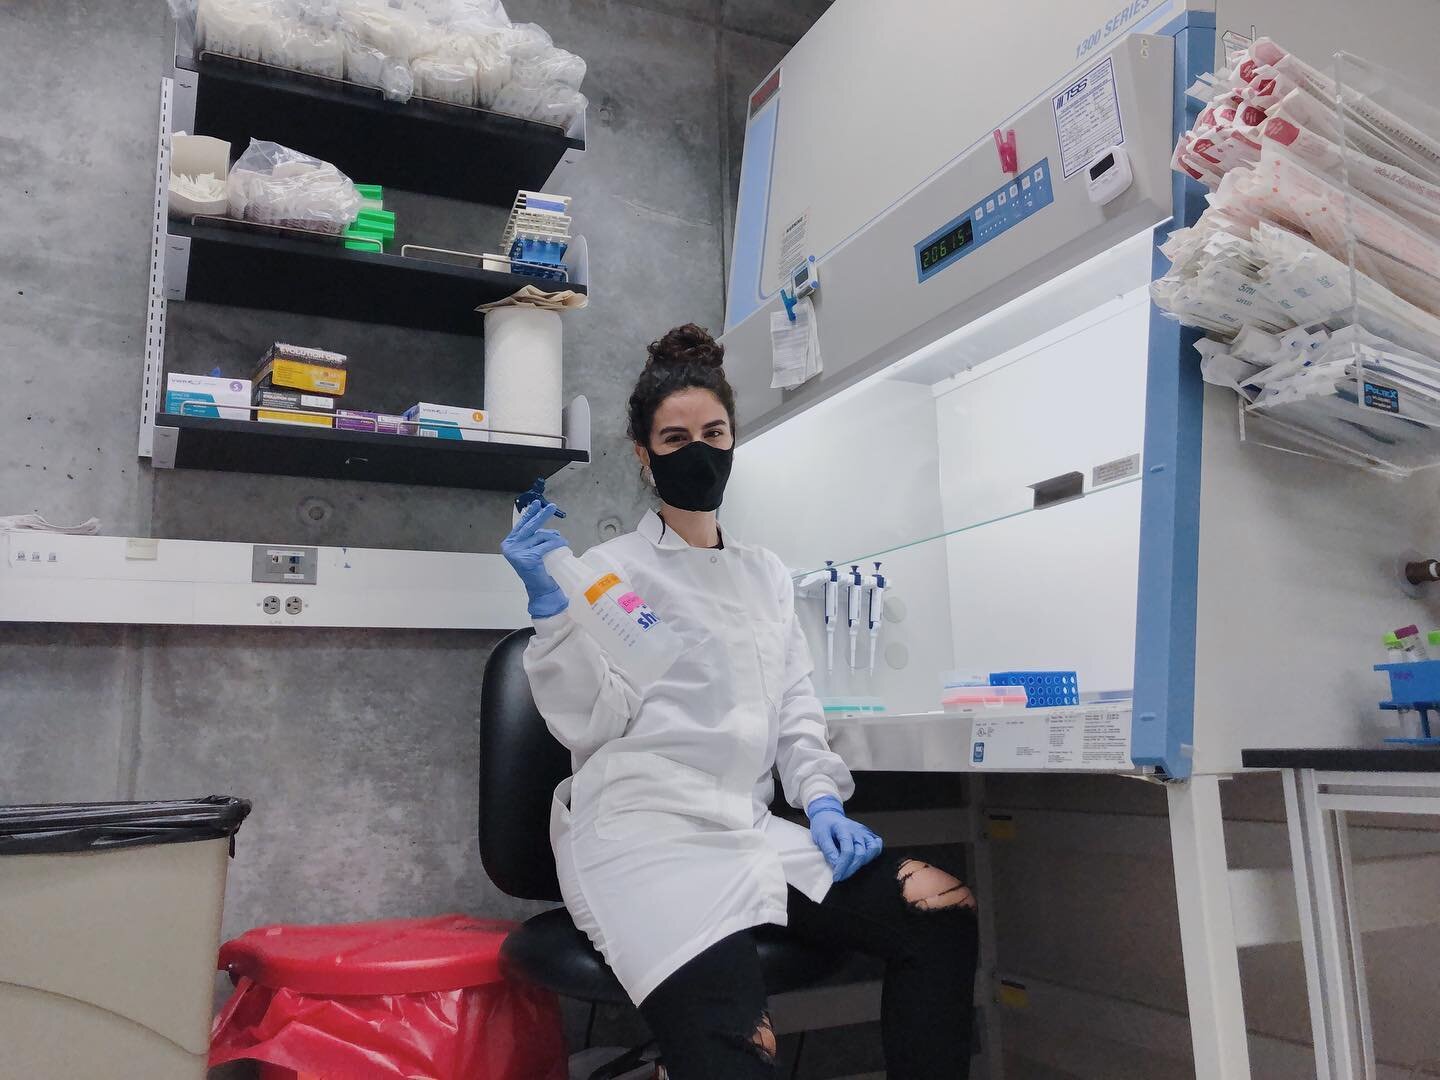 Another Friday, a new blog!🧬Check out Milagros&rsquo;s piece on &ldquo;The Purpose of Lab Rotations During Your First Year as a PhD Student&rdquo; in the Grad School tab on the RiS website. 

Give it read and share it with any grad or future grad wh